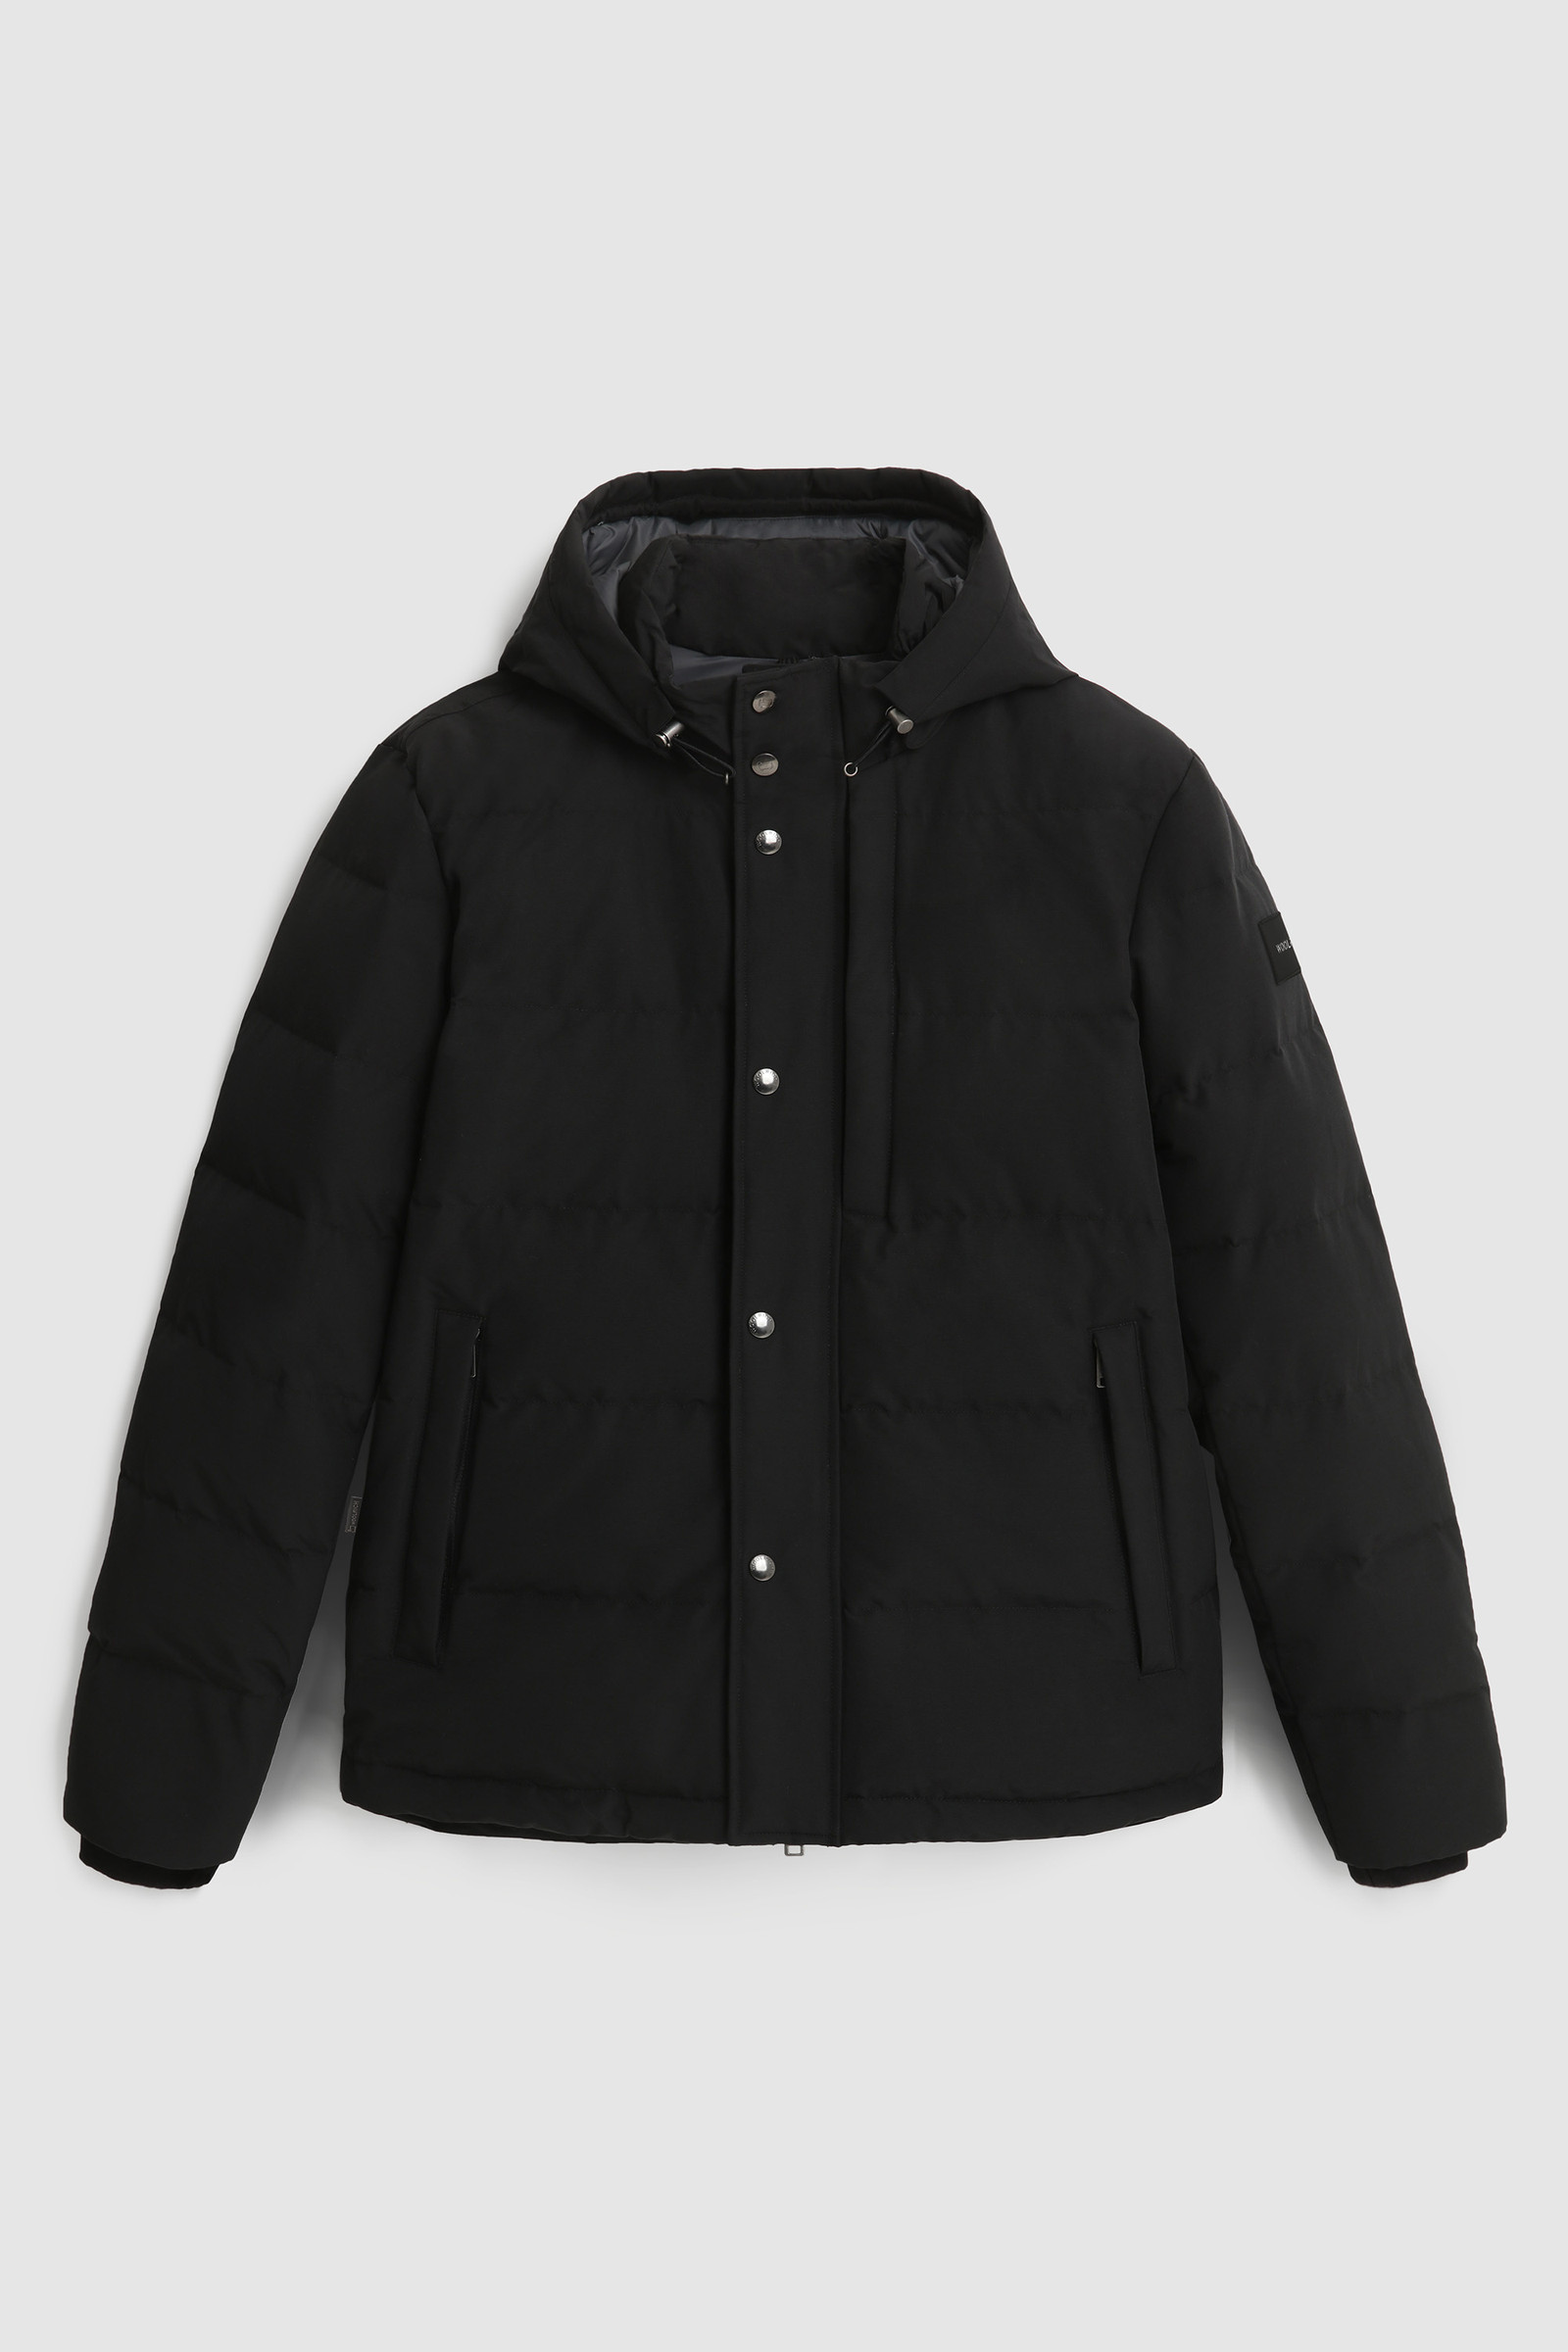 Sierra Green Jacket in Organic Cotton and Recycled Nylon - Men - Black